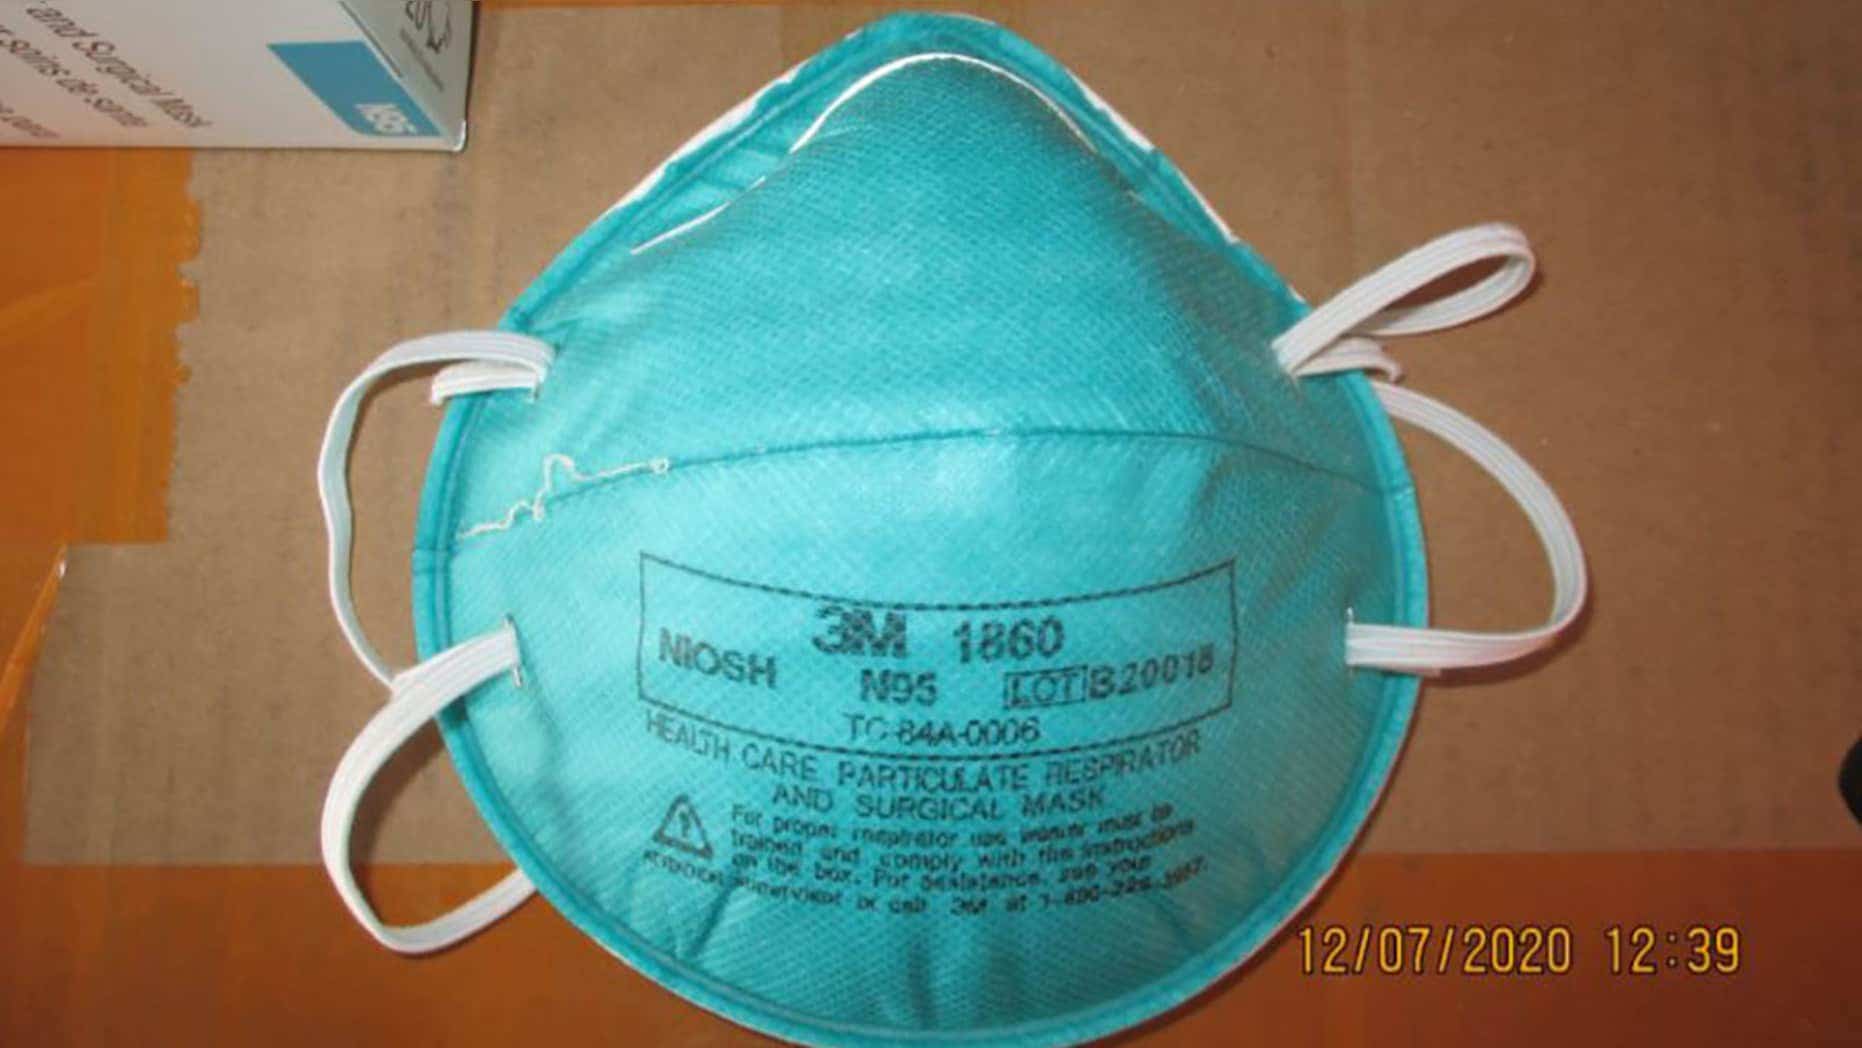 Millions of fake N95 masks shipped to multiple states, feds say